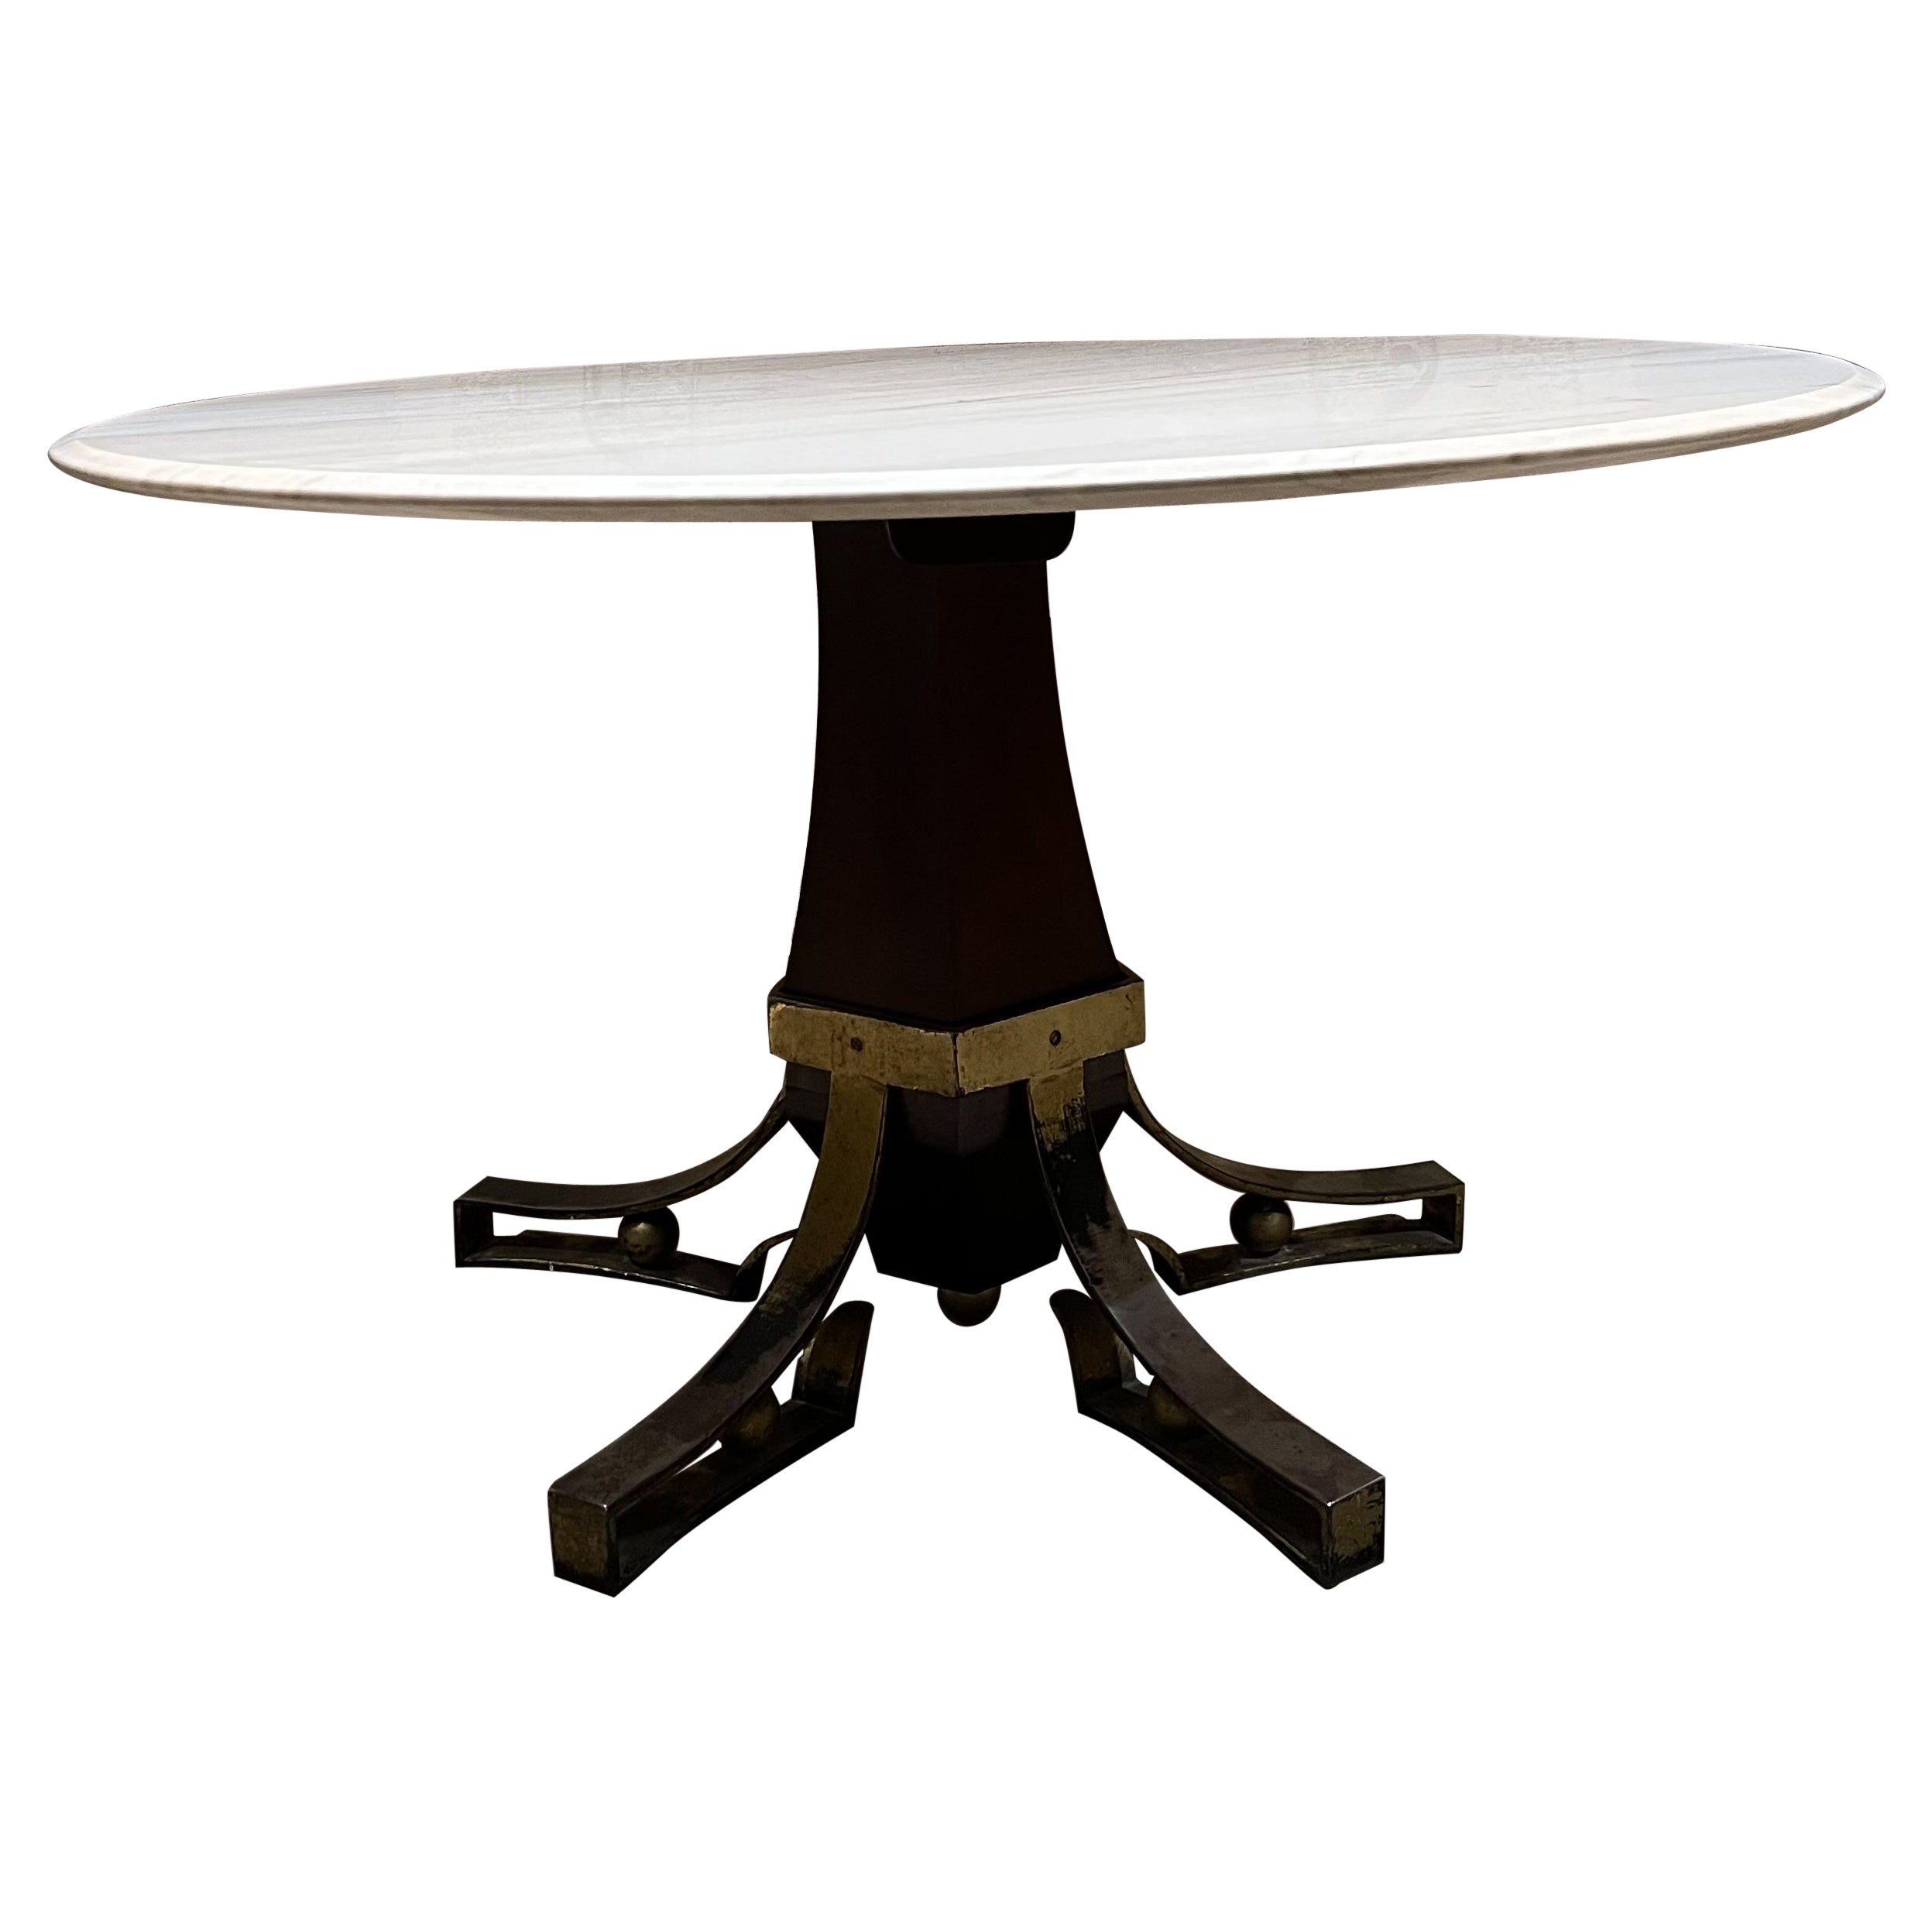 Modernist Dining Table in White Marble Sculptural Base Arturo Pani Mexico City